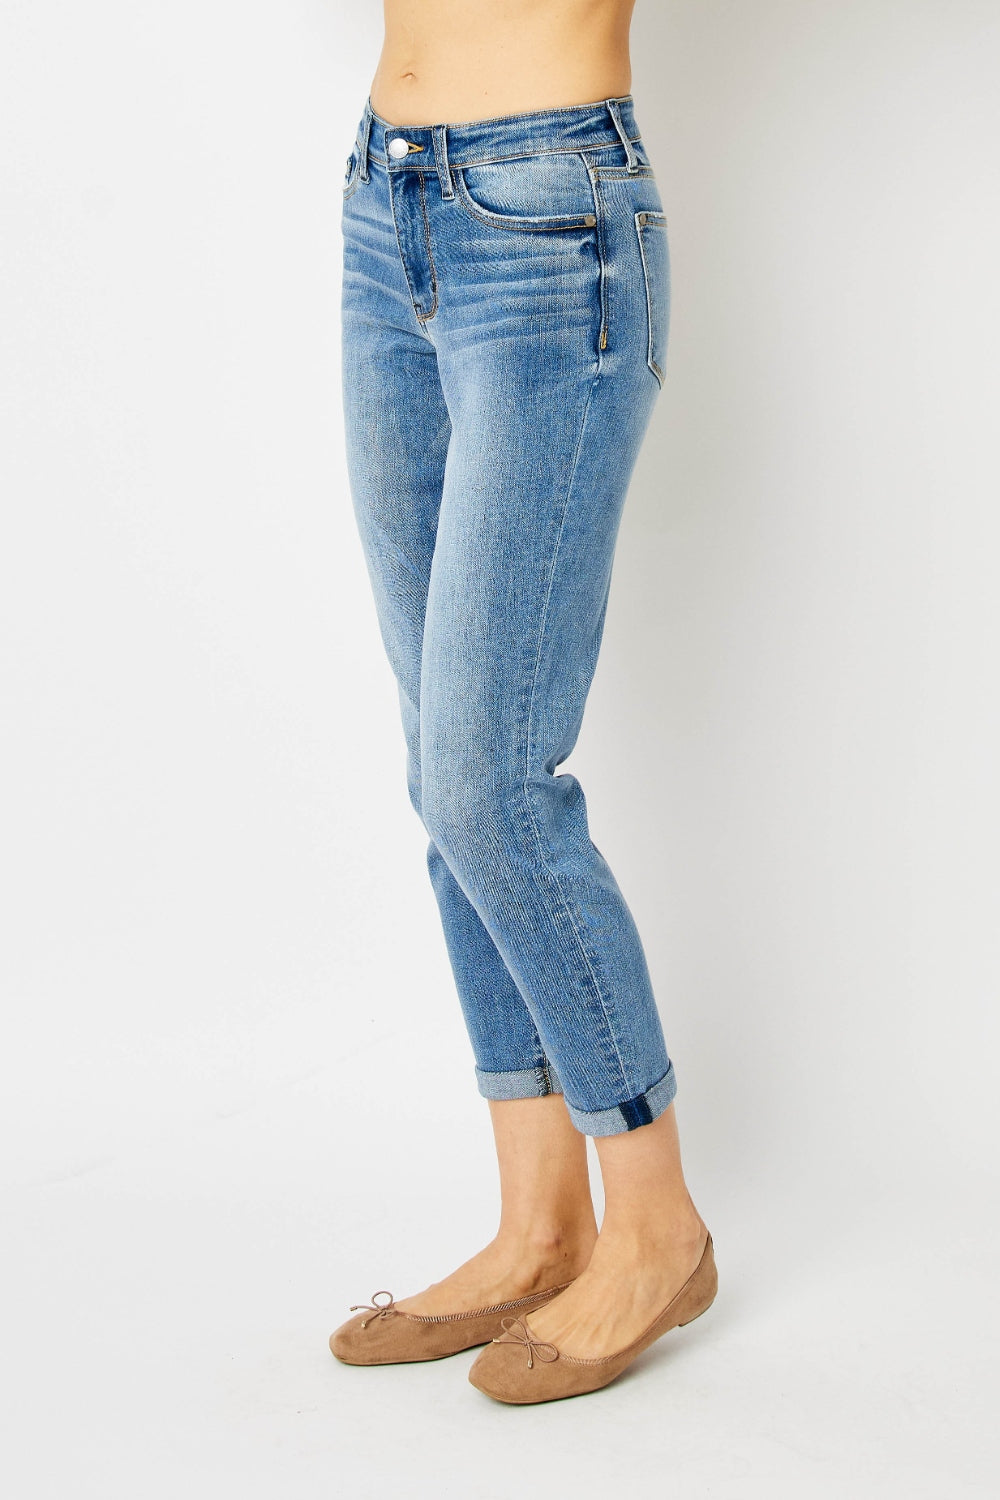 Judy Blue High Waist Sea Green Jeans – Shabby Chic Boutique and